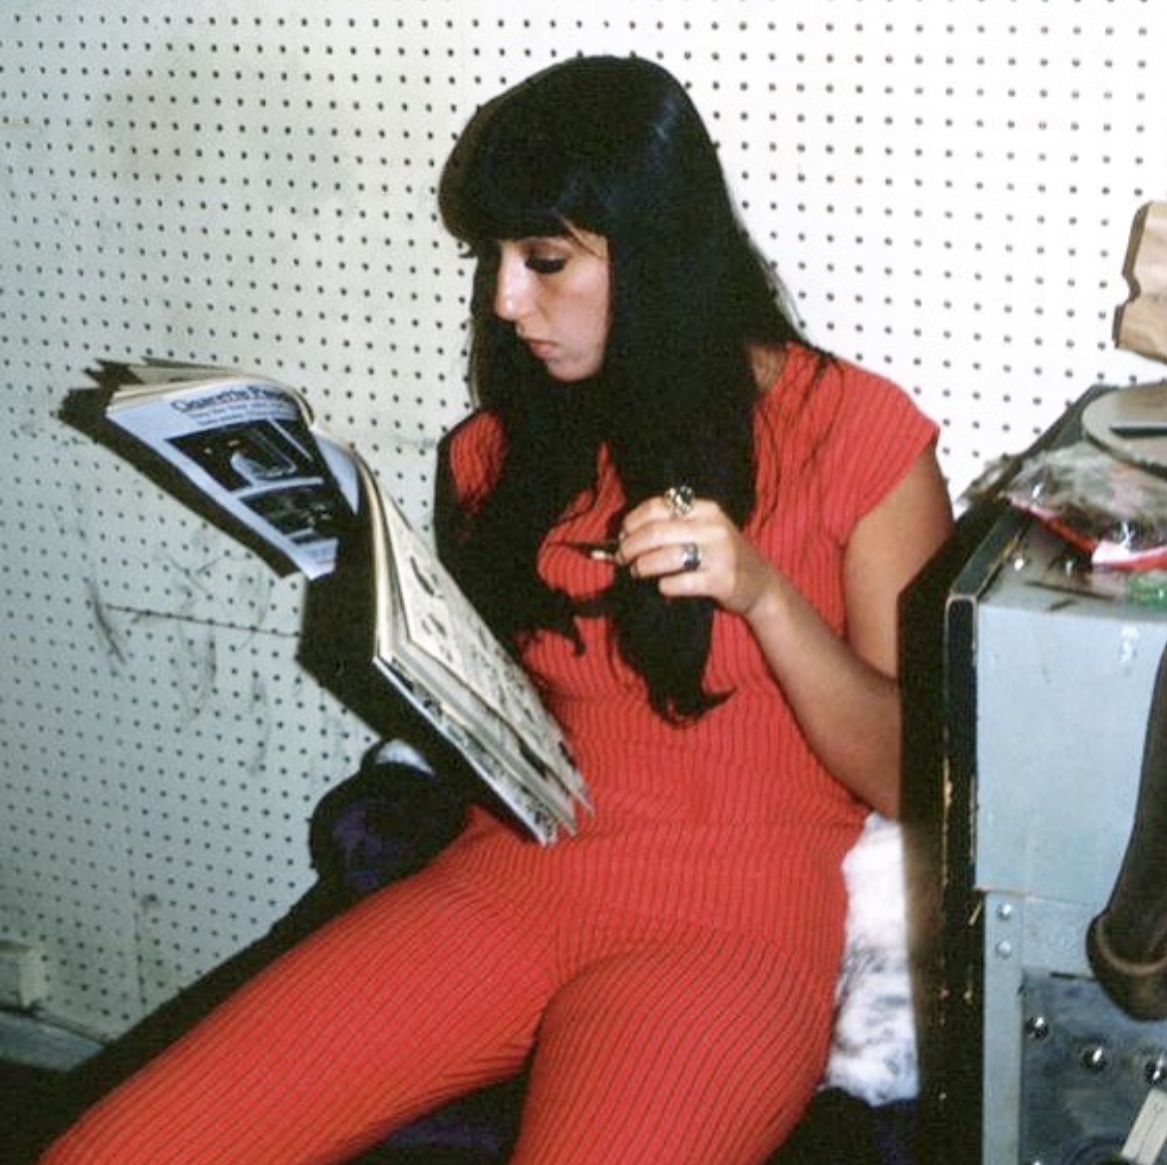 Cher (Taurus), wearing all red, reads a magazine